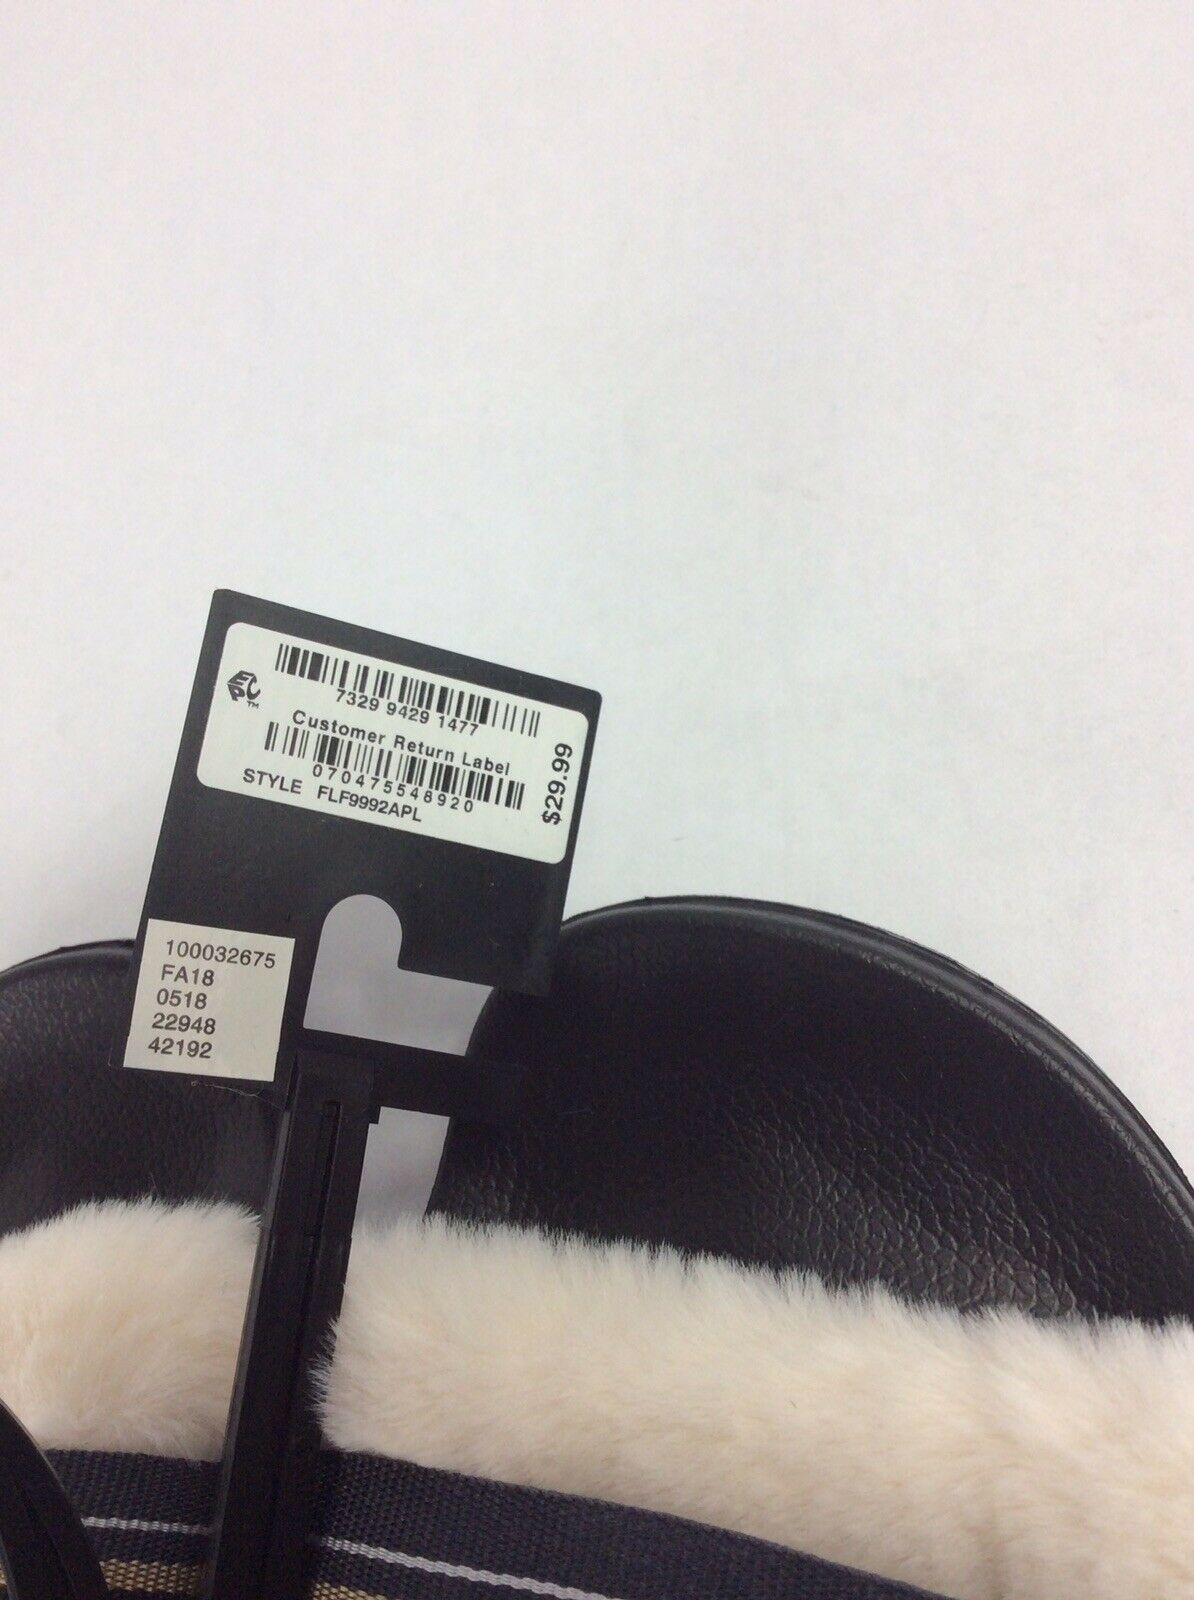 INC Slippers XL $29.99 - Outlet Designers